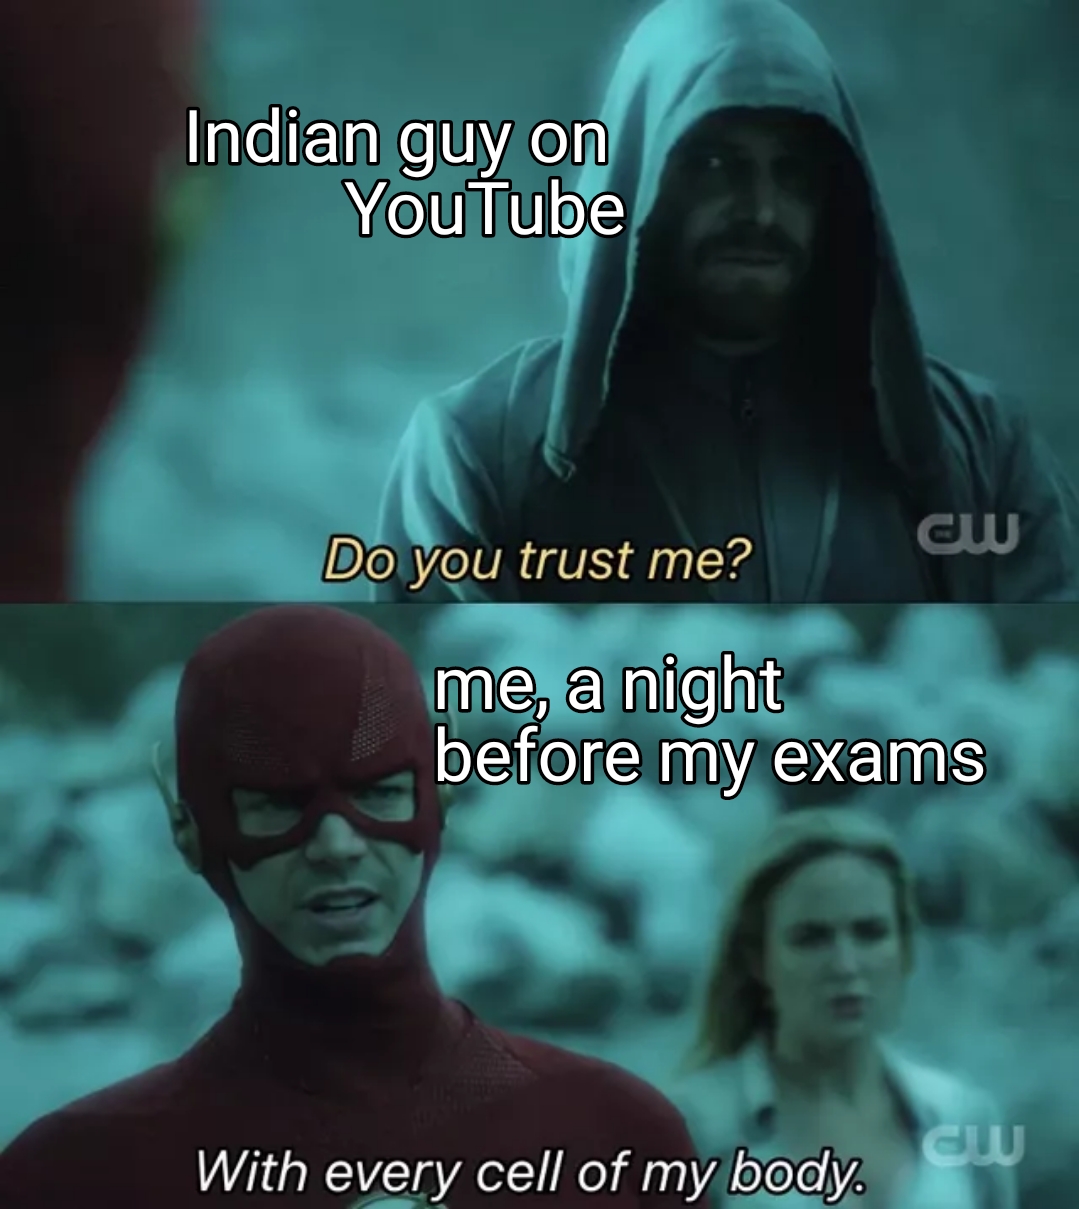 coronavirus cia meme - Indian guy on YouTube Cw Do you trust me? me, a night before my exams With every cell of my body.